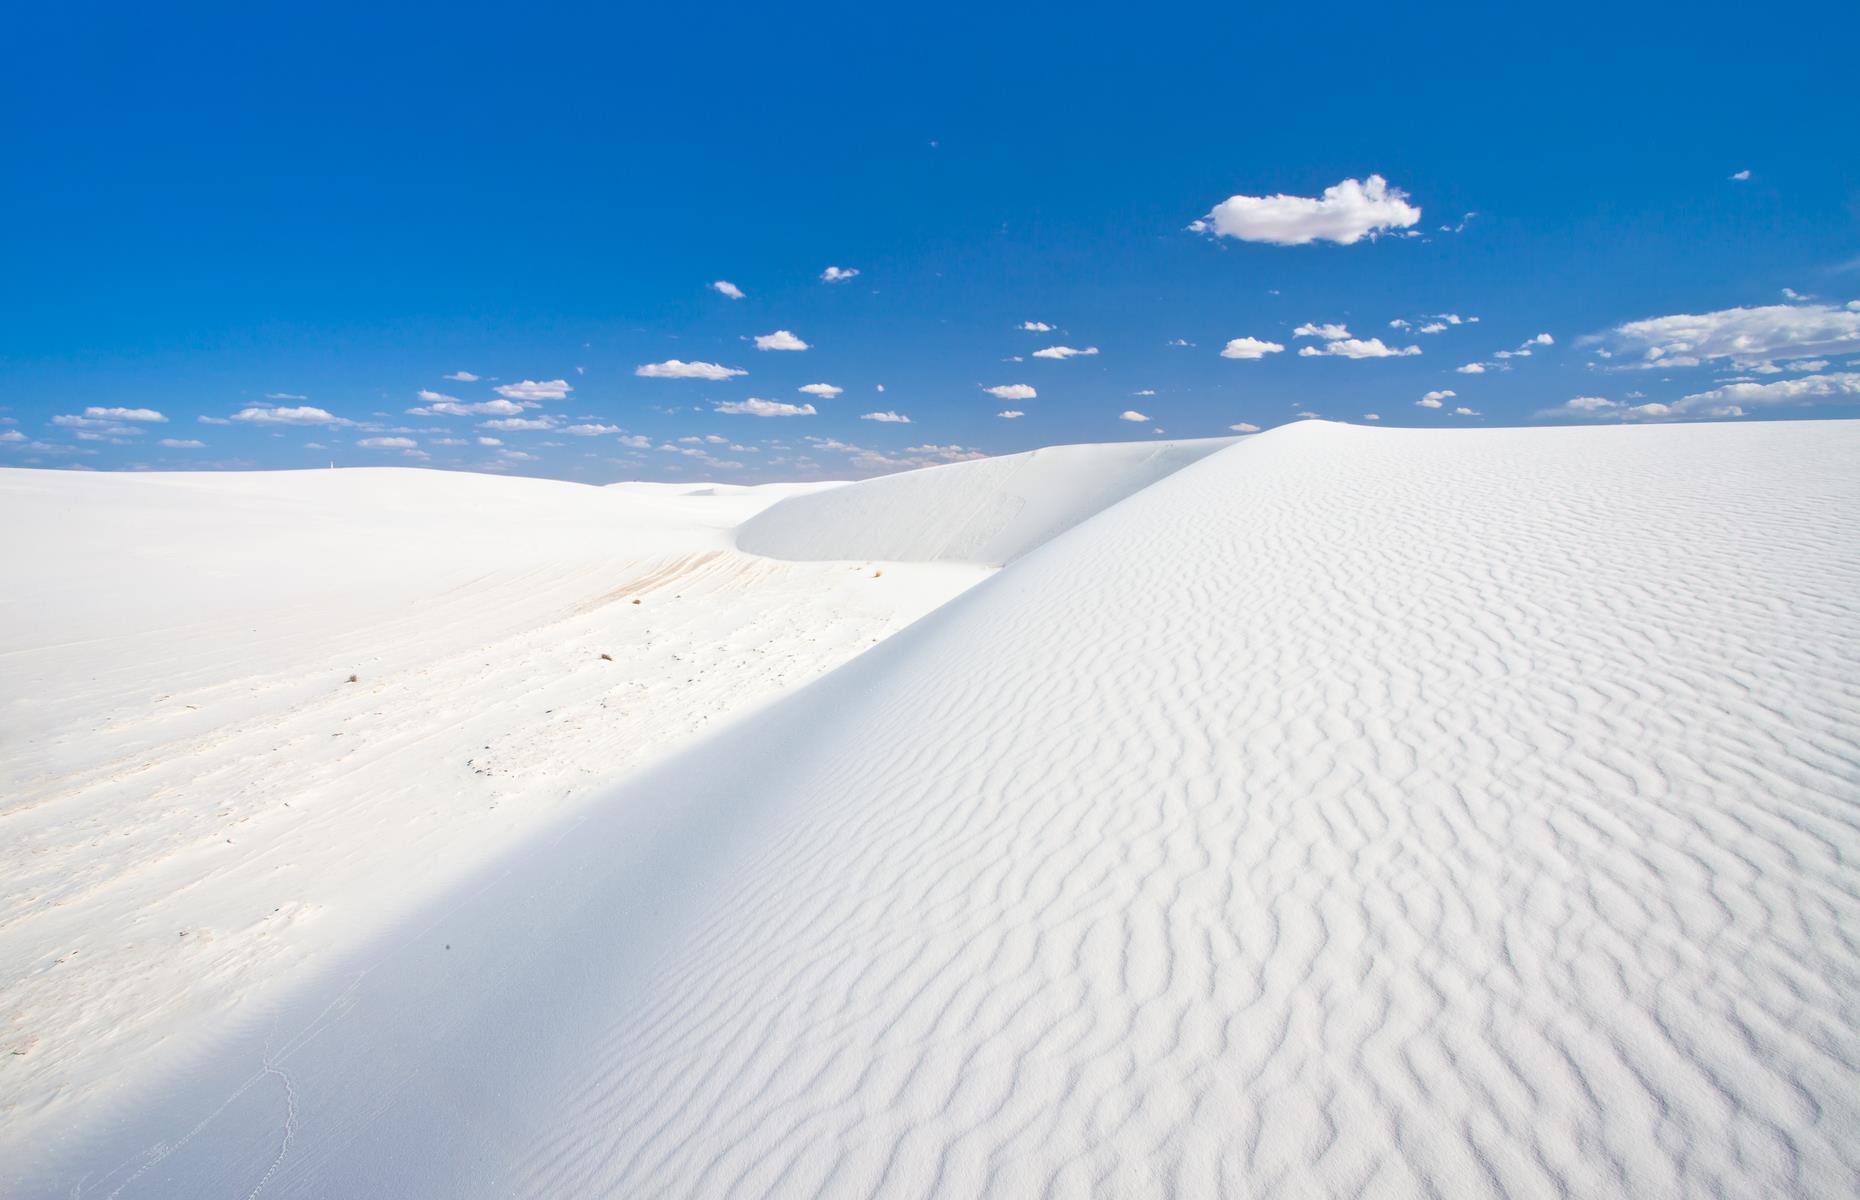 <p><a href="https://www.nps.gov/whsa/index.htm">White Sands</a> isn’t a misnomer: these pale dunes resemble whisked egg whites or soft peaks of Chantilly cream. They roll and ripple for 275 square miles (710sq km) between the Andres and Sacramento mountain ranges. You’ll probably want to jump around and roll down the slopes, and you can: sledding and hiking is permitted.</p>